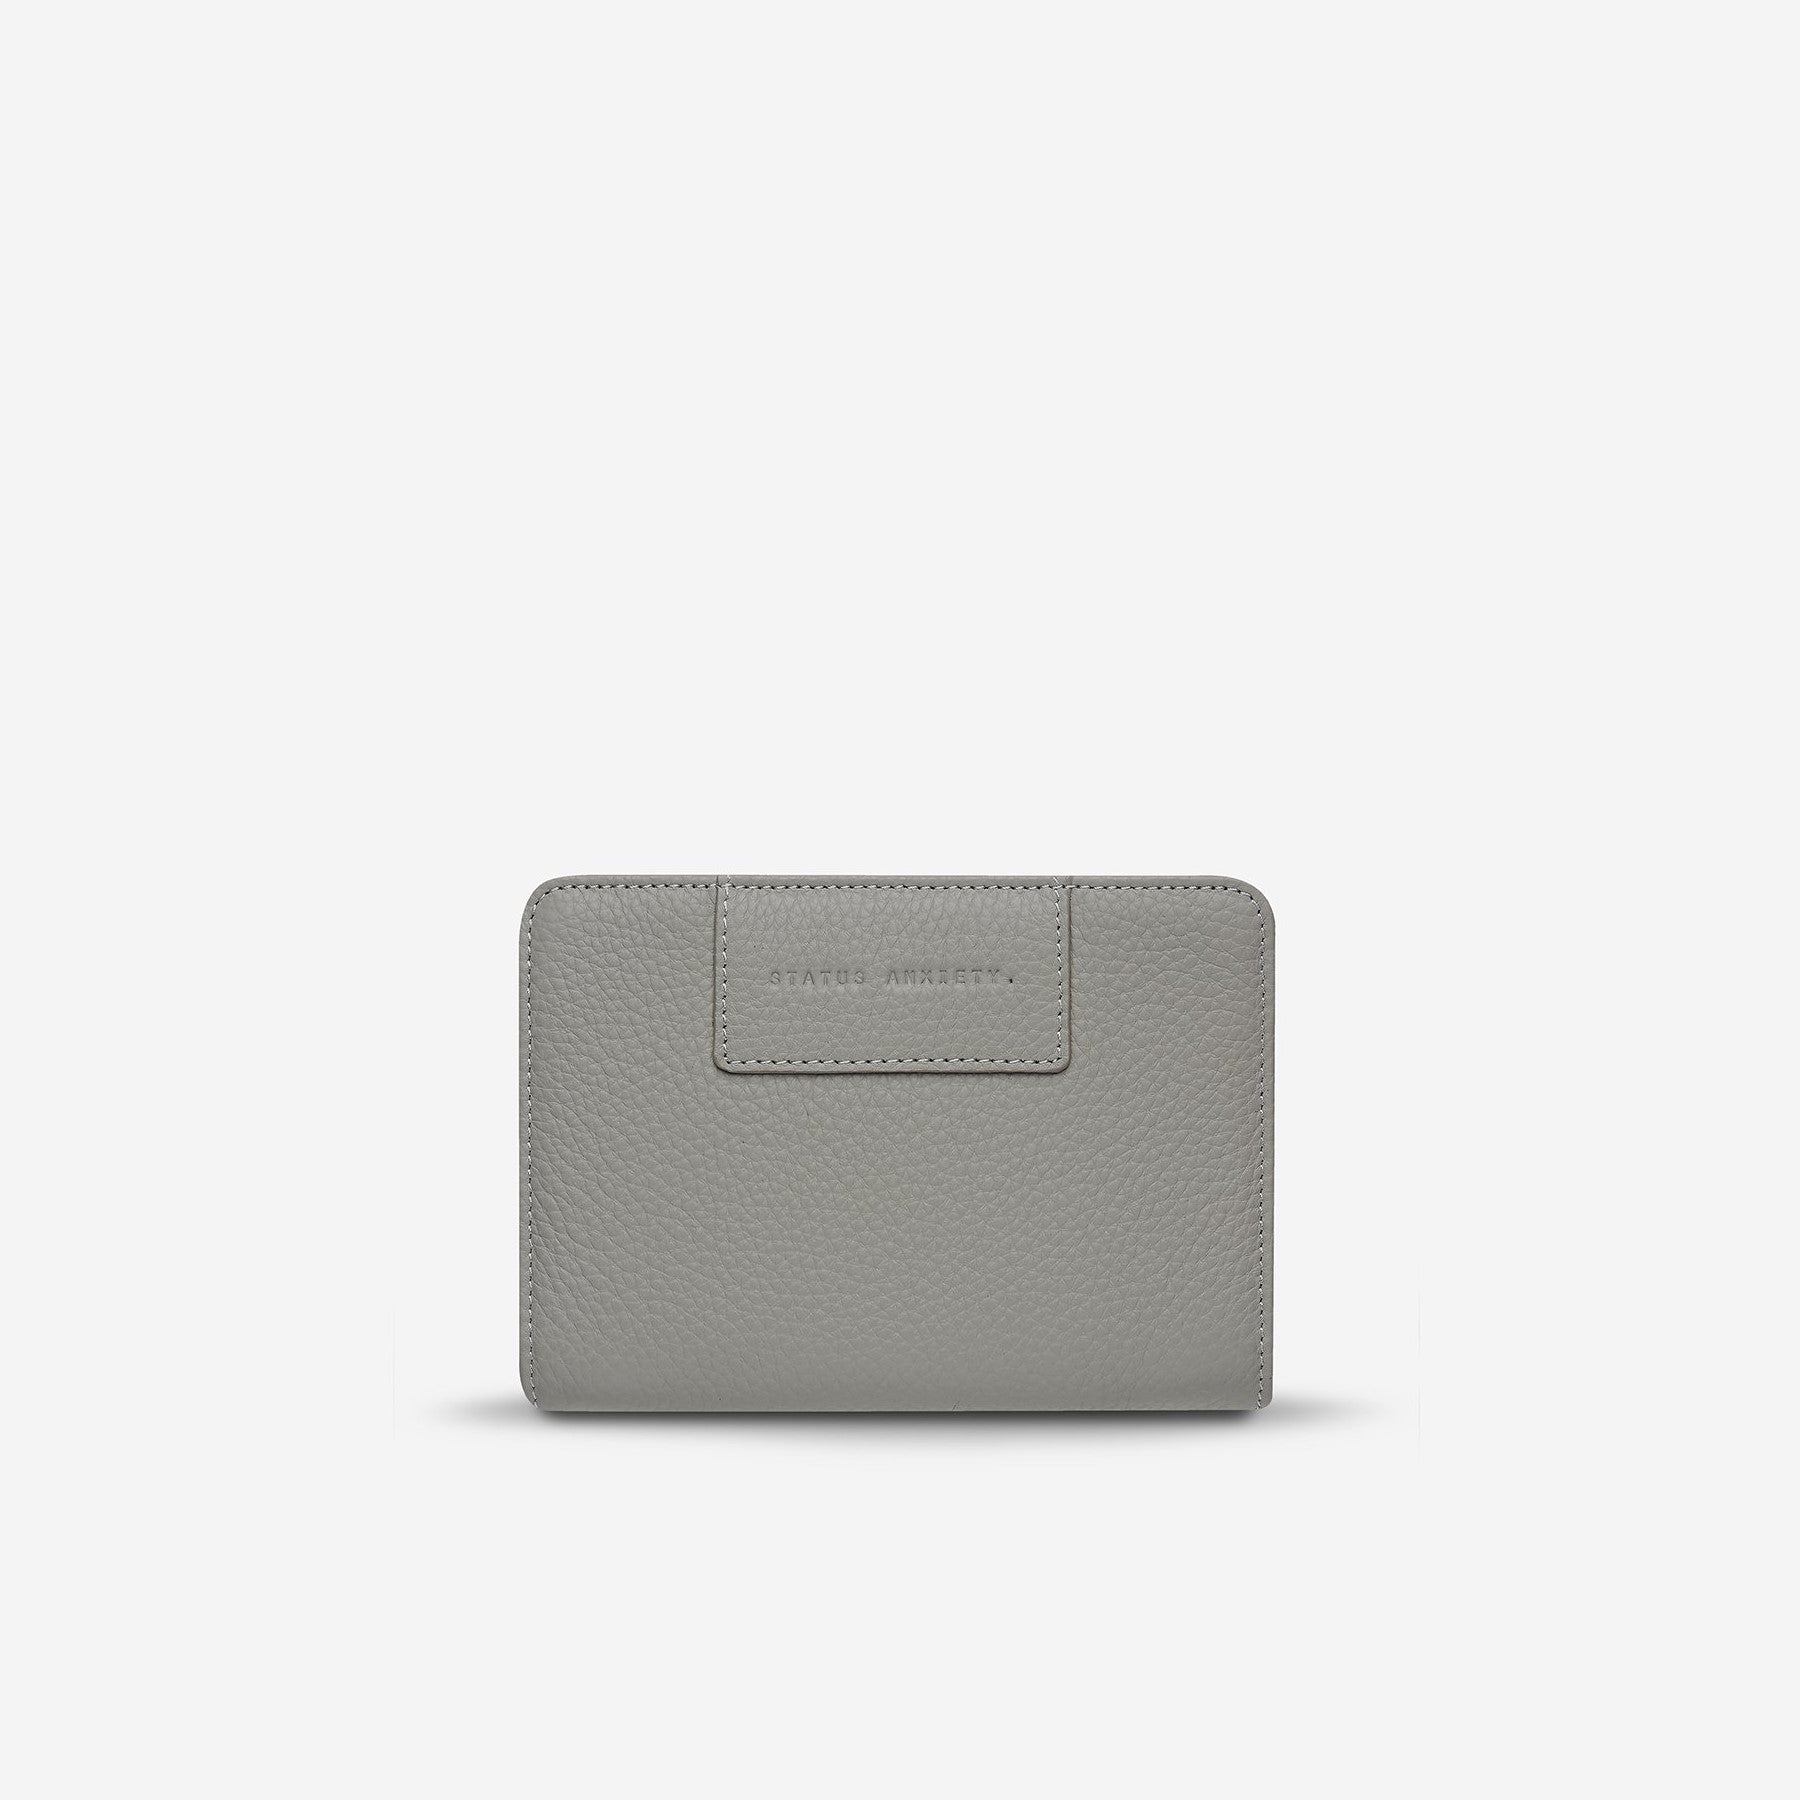 status-anxiety-wallet-popular-problems-light-grey-frontRESIZED